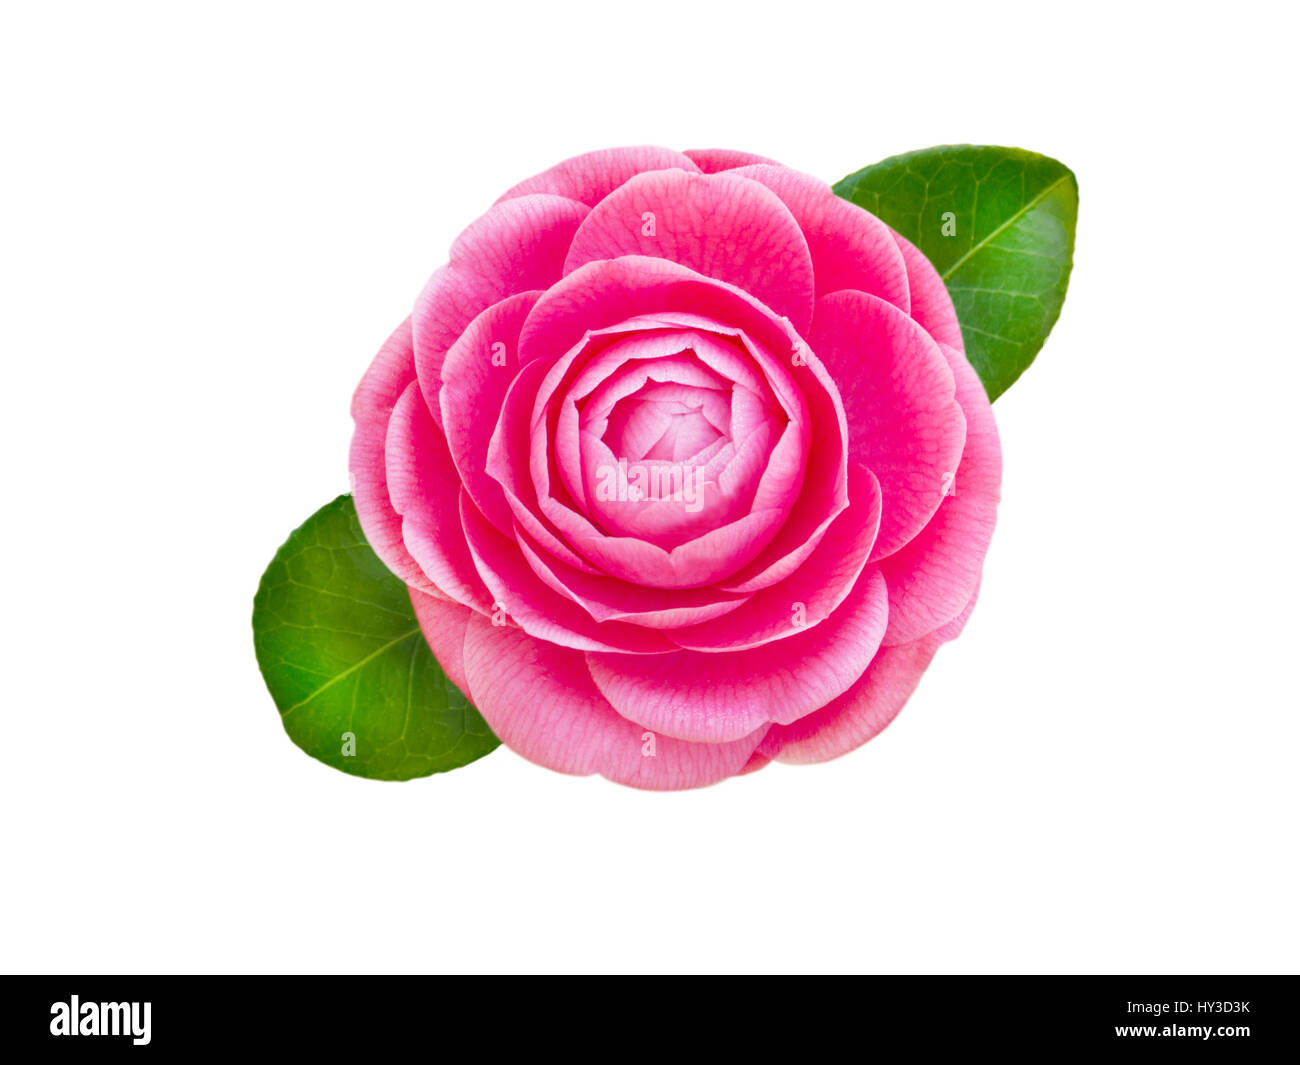 Bright pink camellia rose form flower with leaves isolated on white Stock Photo